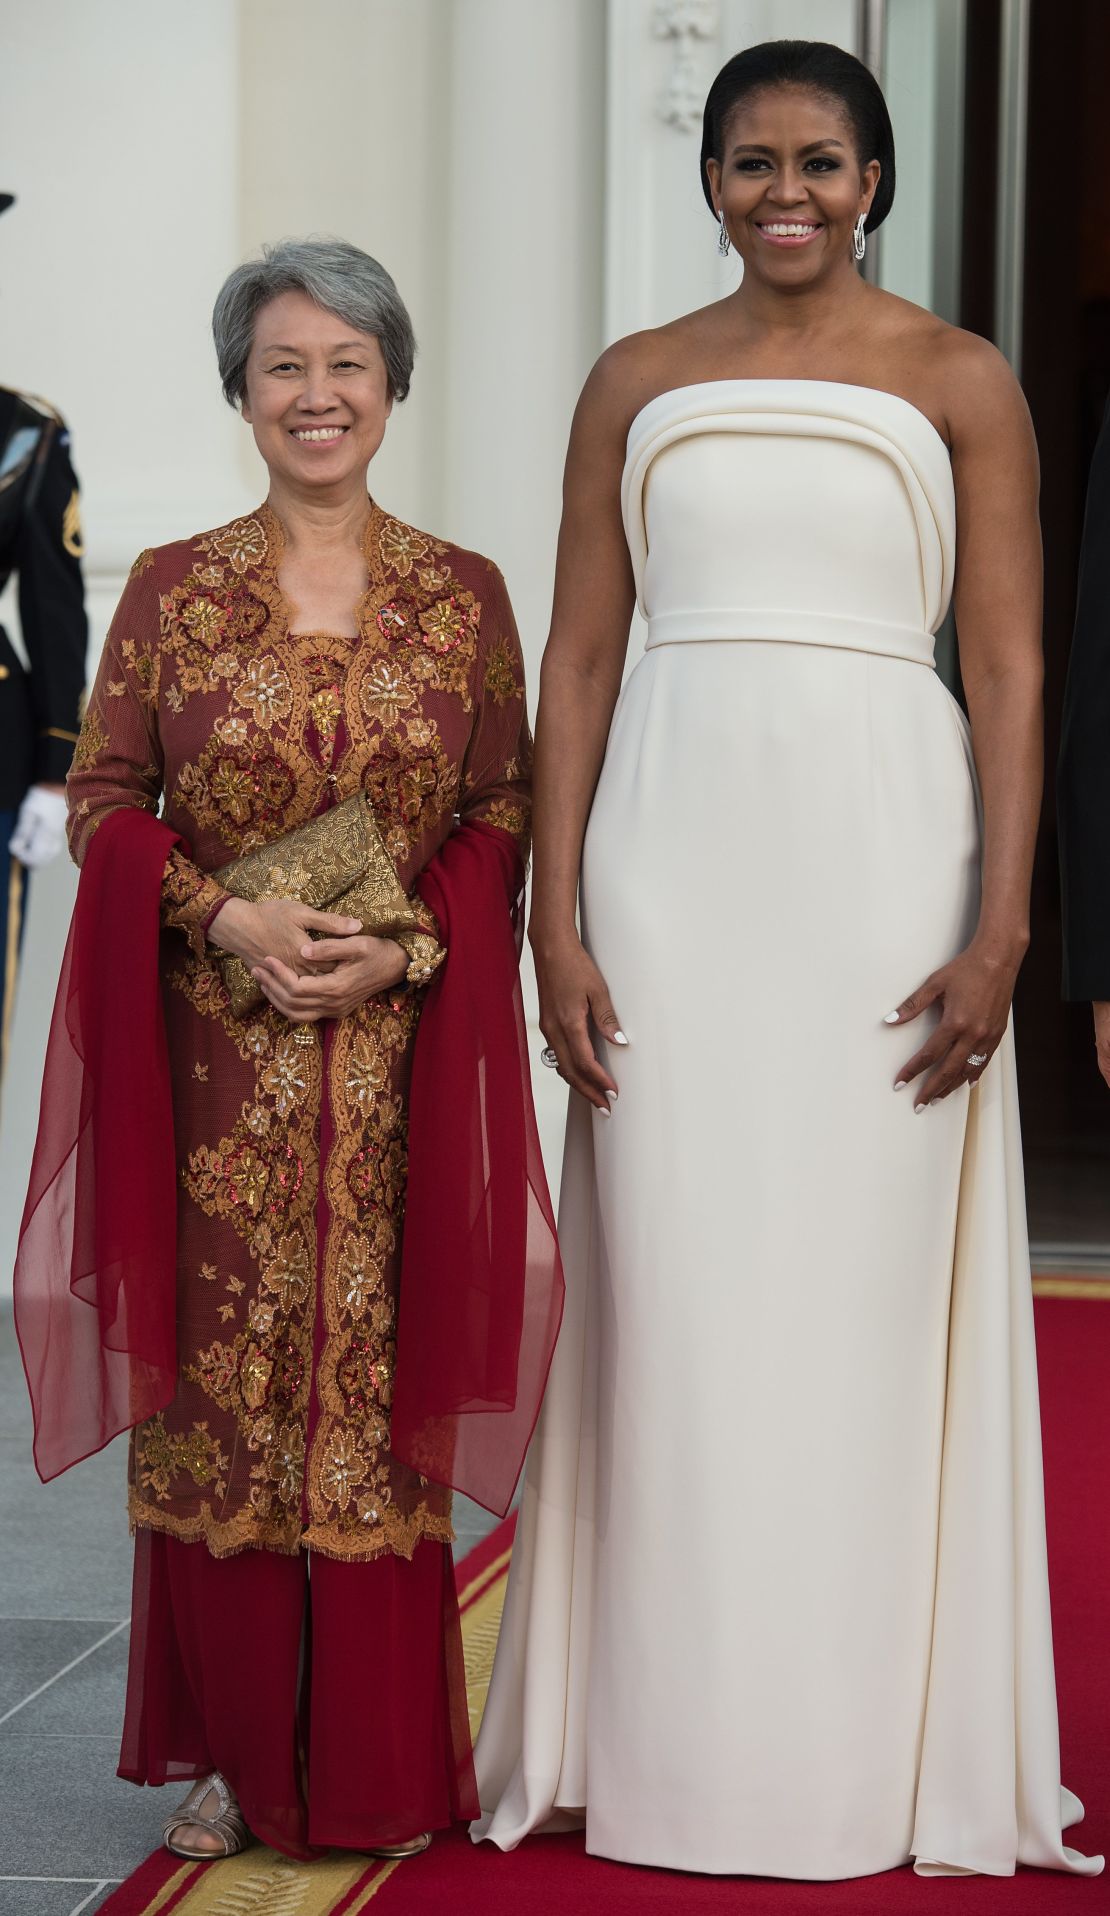 Michelle Obama wore a gown by emerging American designer Brandon Maxwell to a White House state dinner with Singapore's Ho Ching and her husband, Singapore Prime Minister Lee Hsien Loong. 